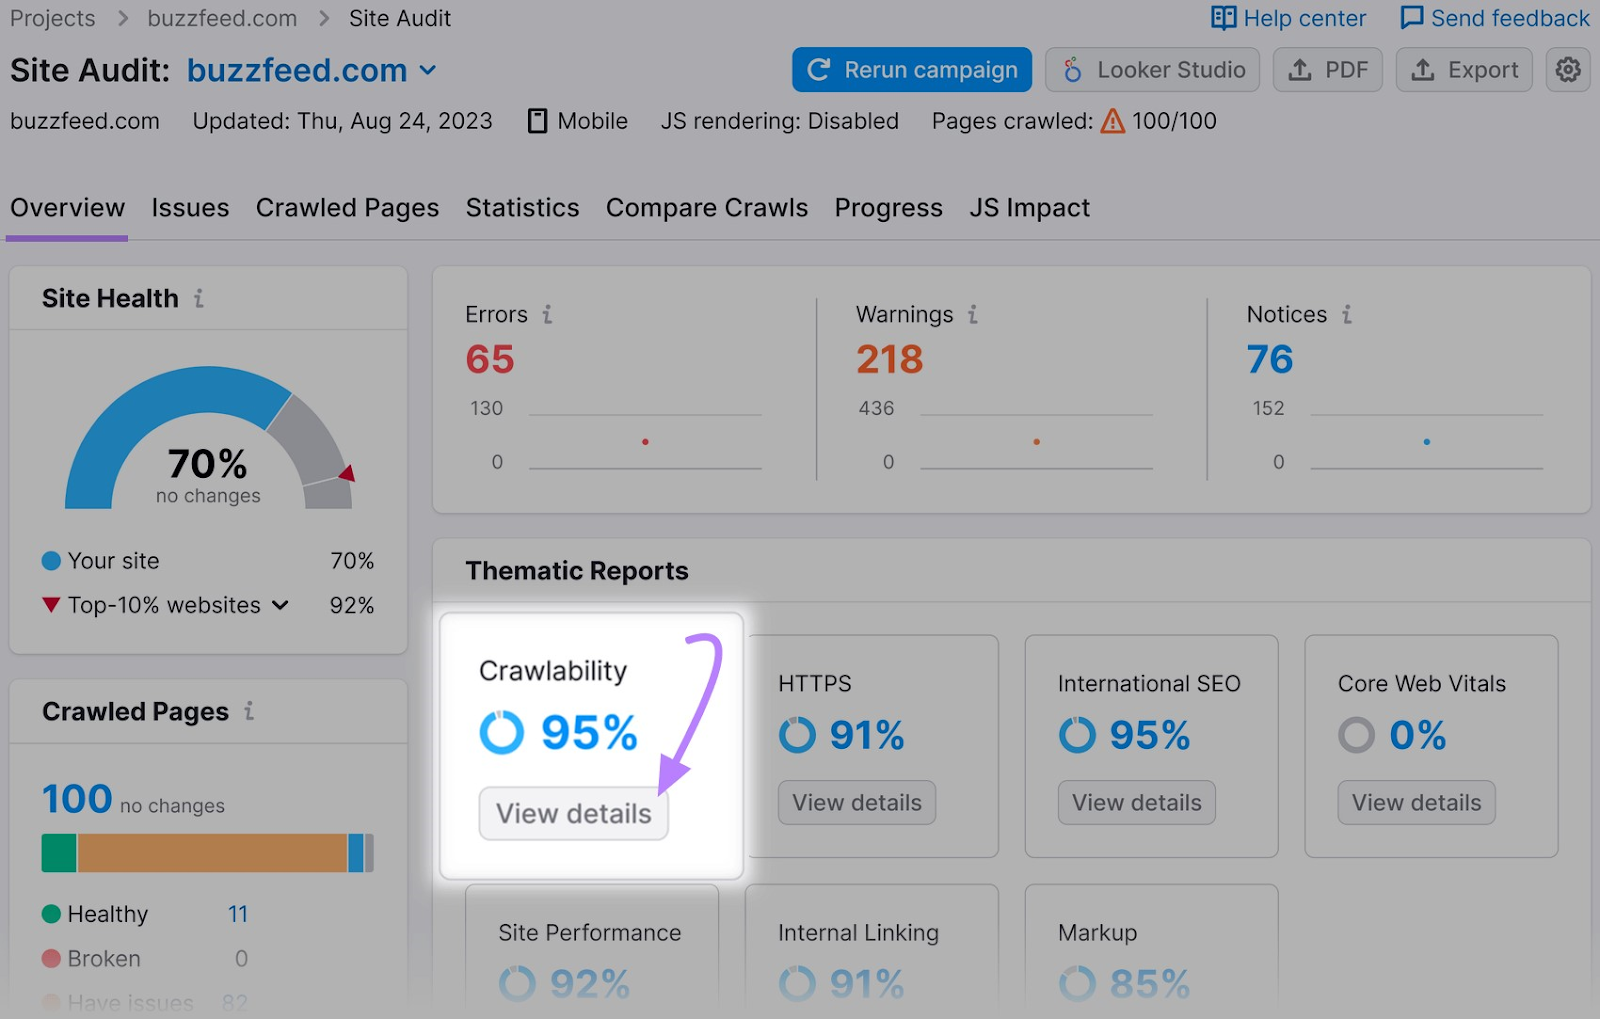 Site Audit “Crawlability” score shows 95% for BuzzFeed